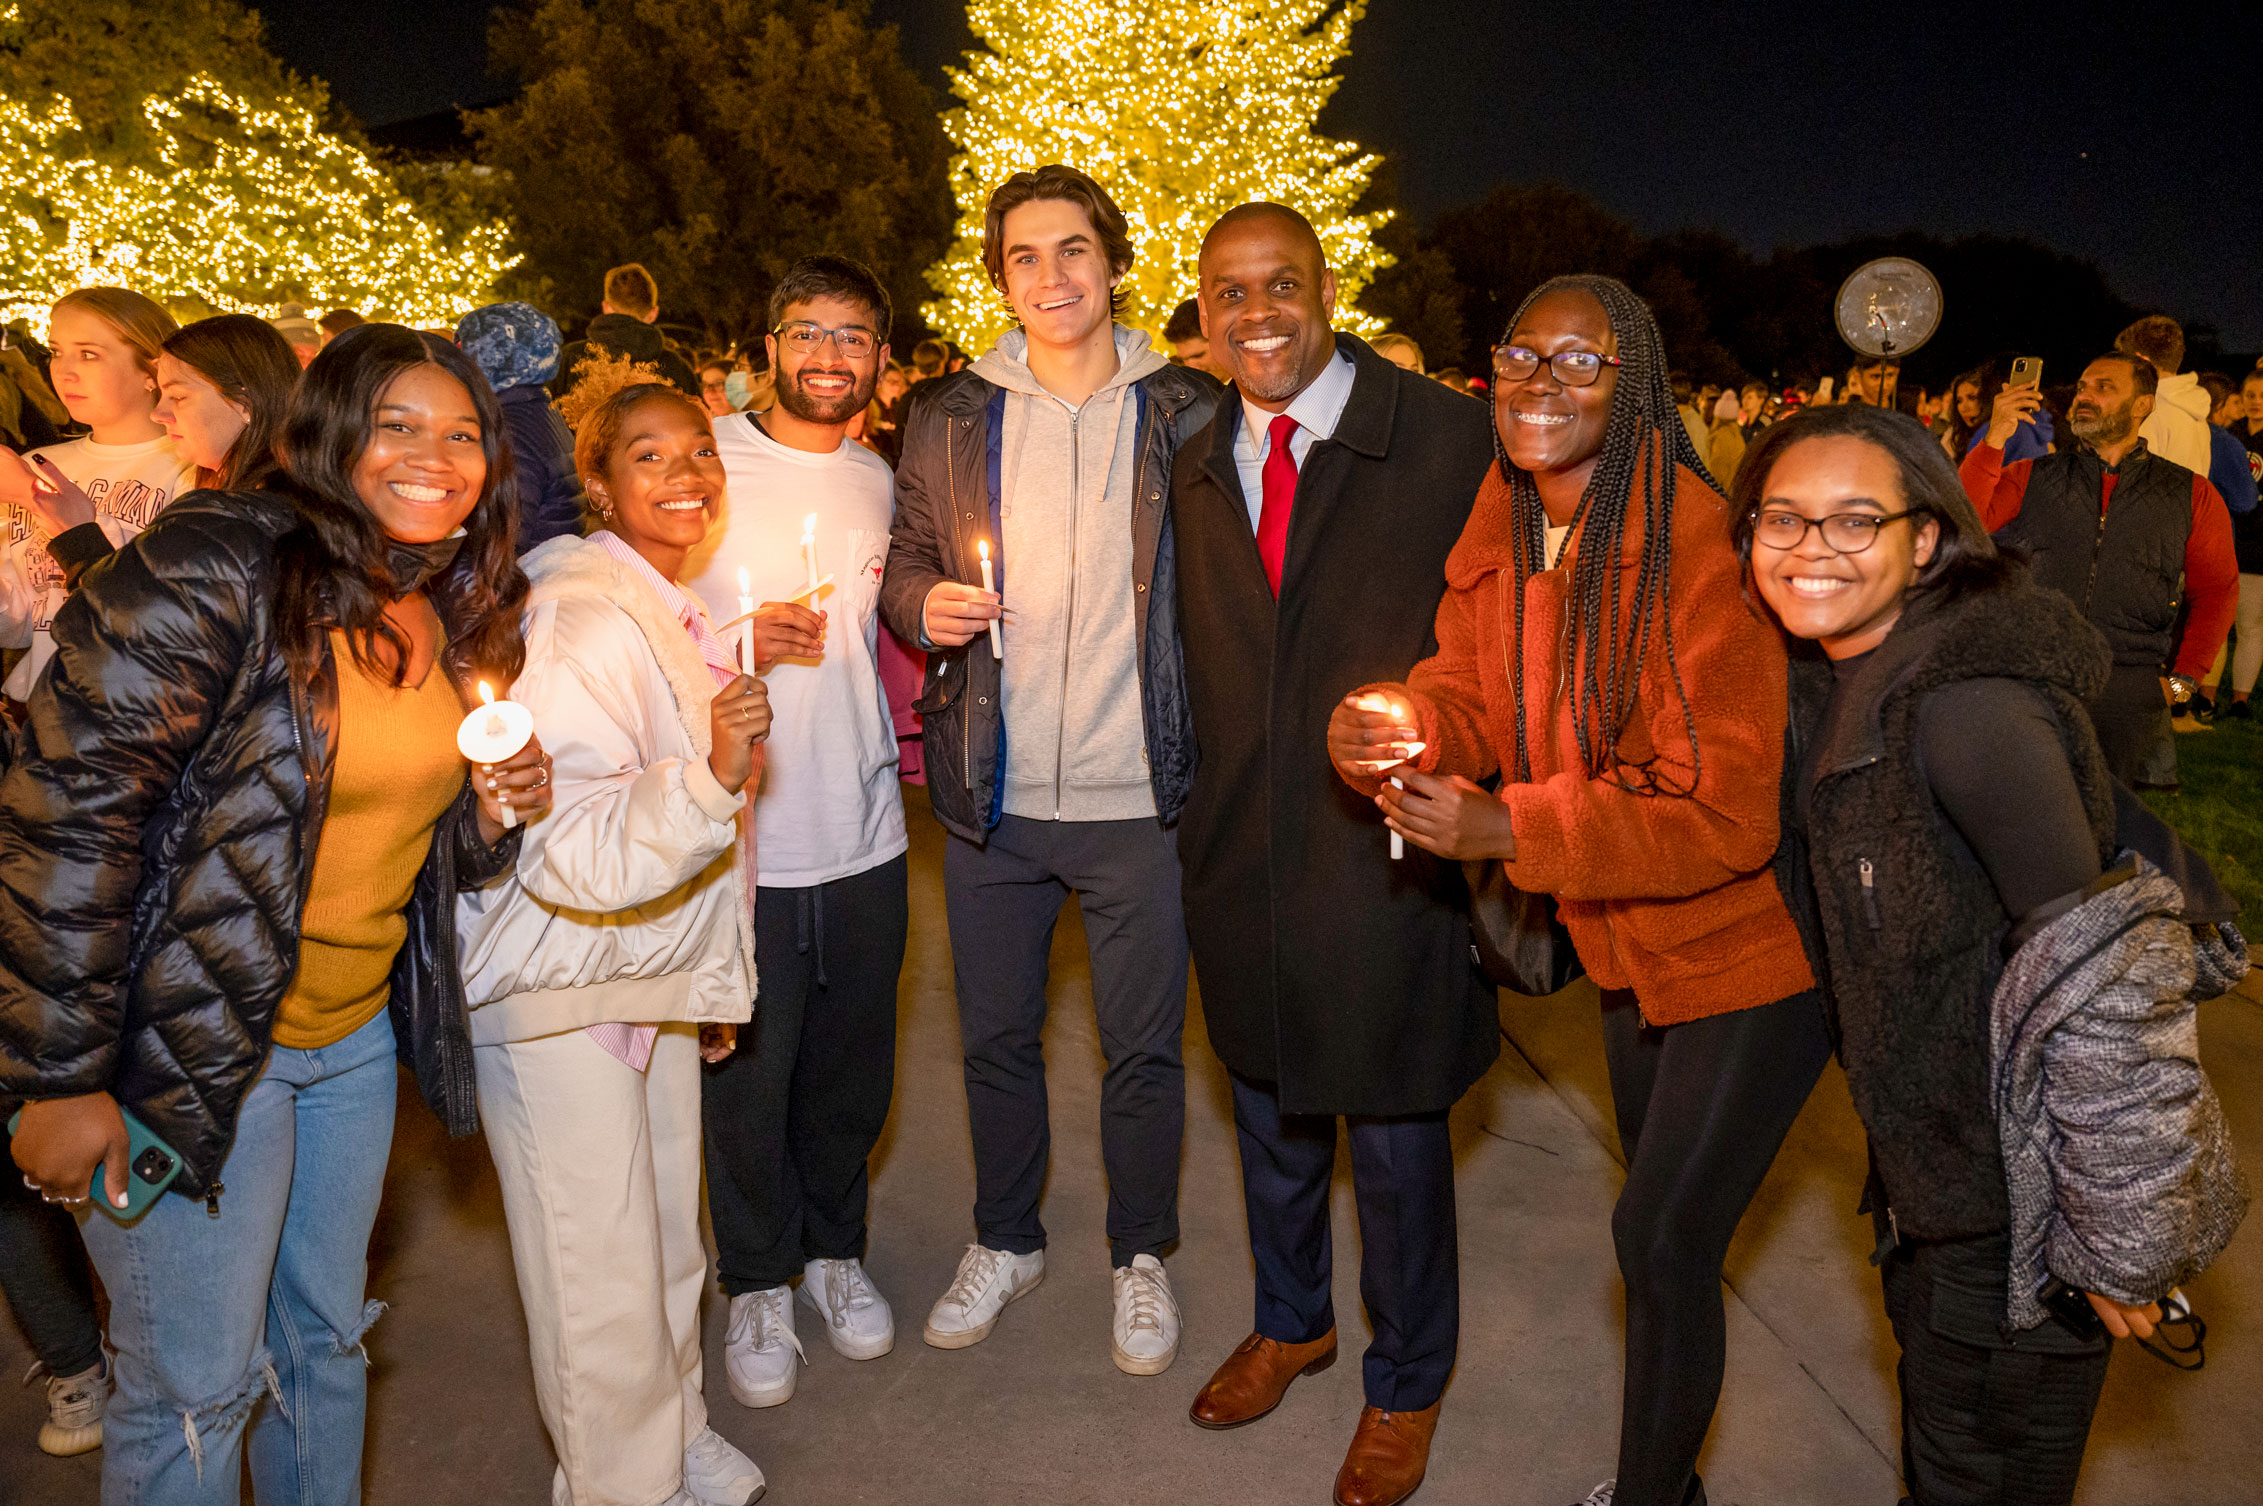 Dr. Mmeje and students at Celebration of Lights